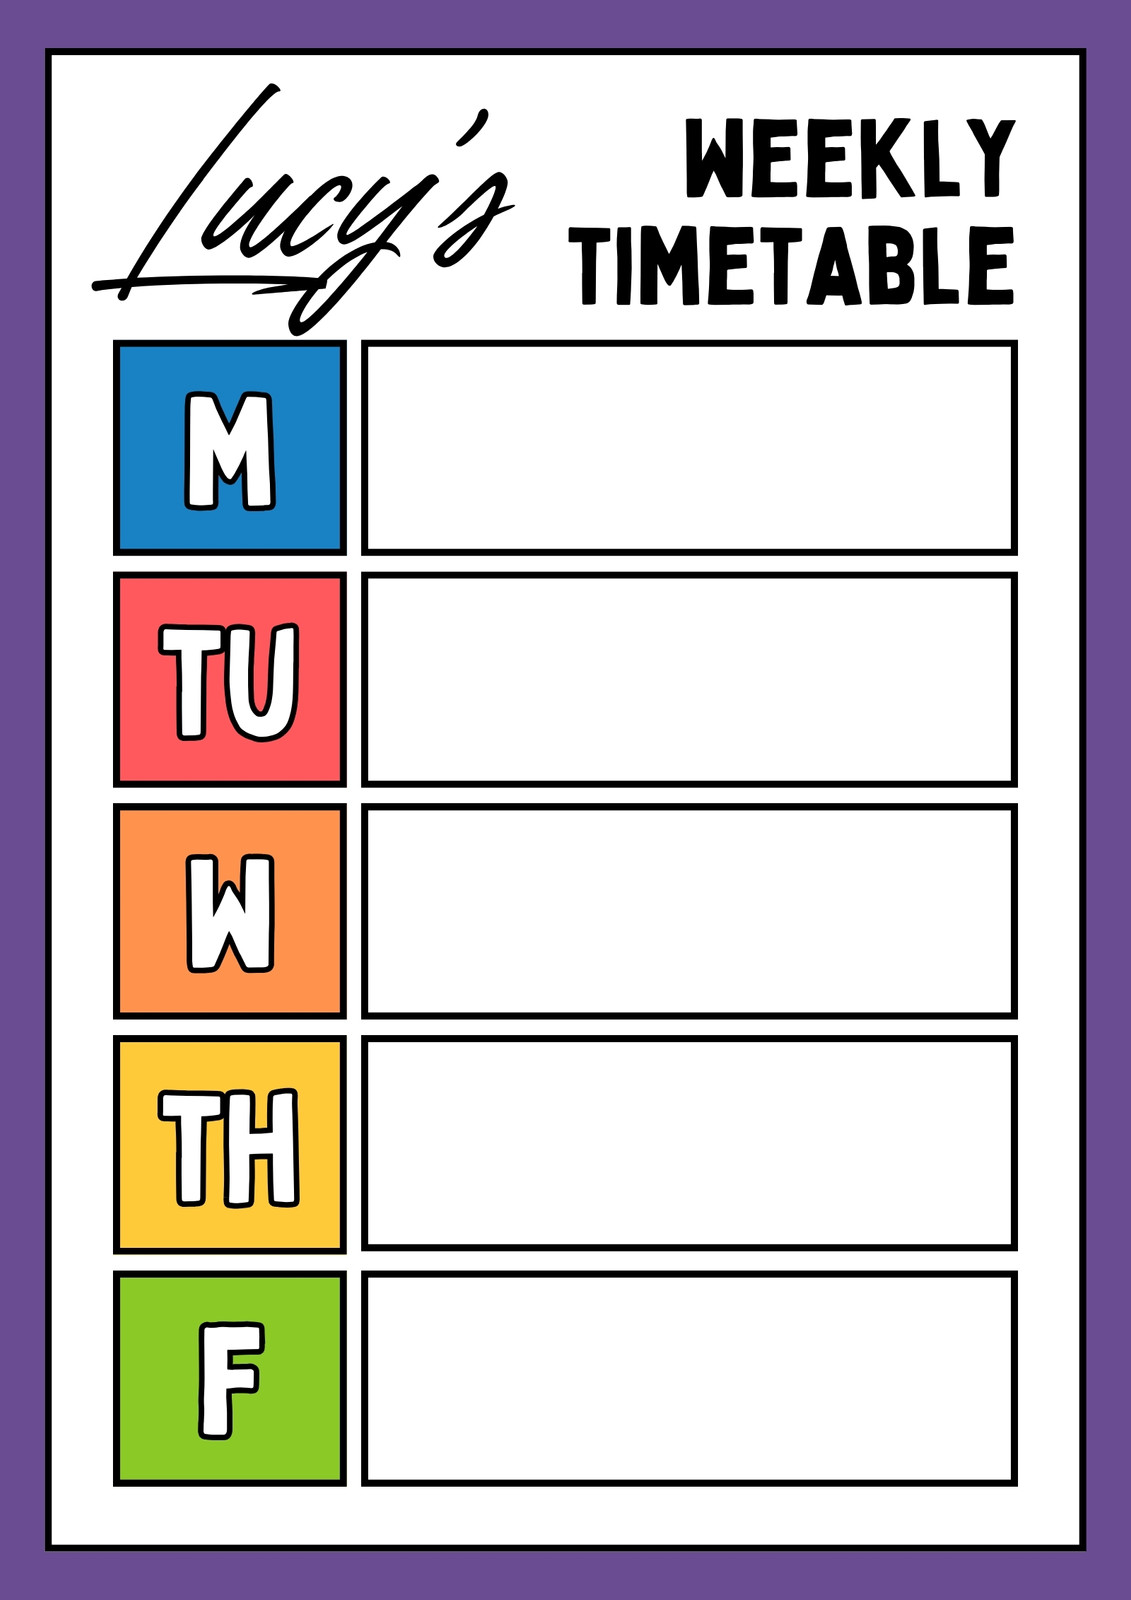 Student Visual Timetable Document in Colorful Lined Bold Style